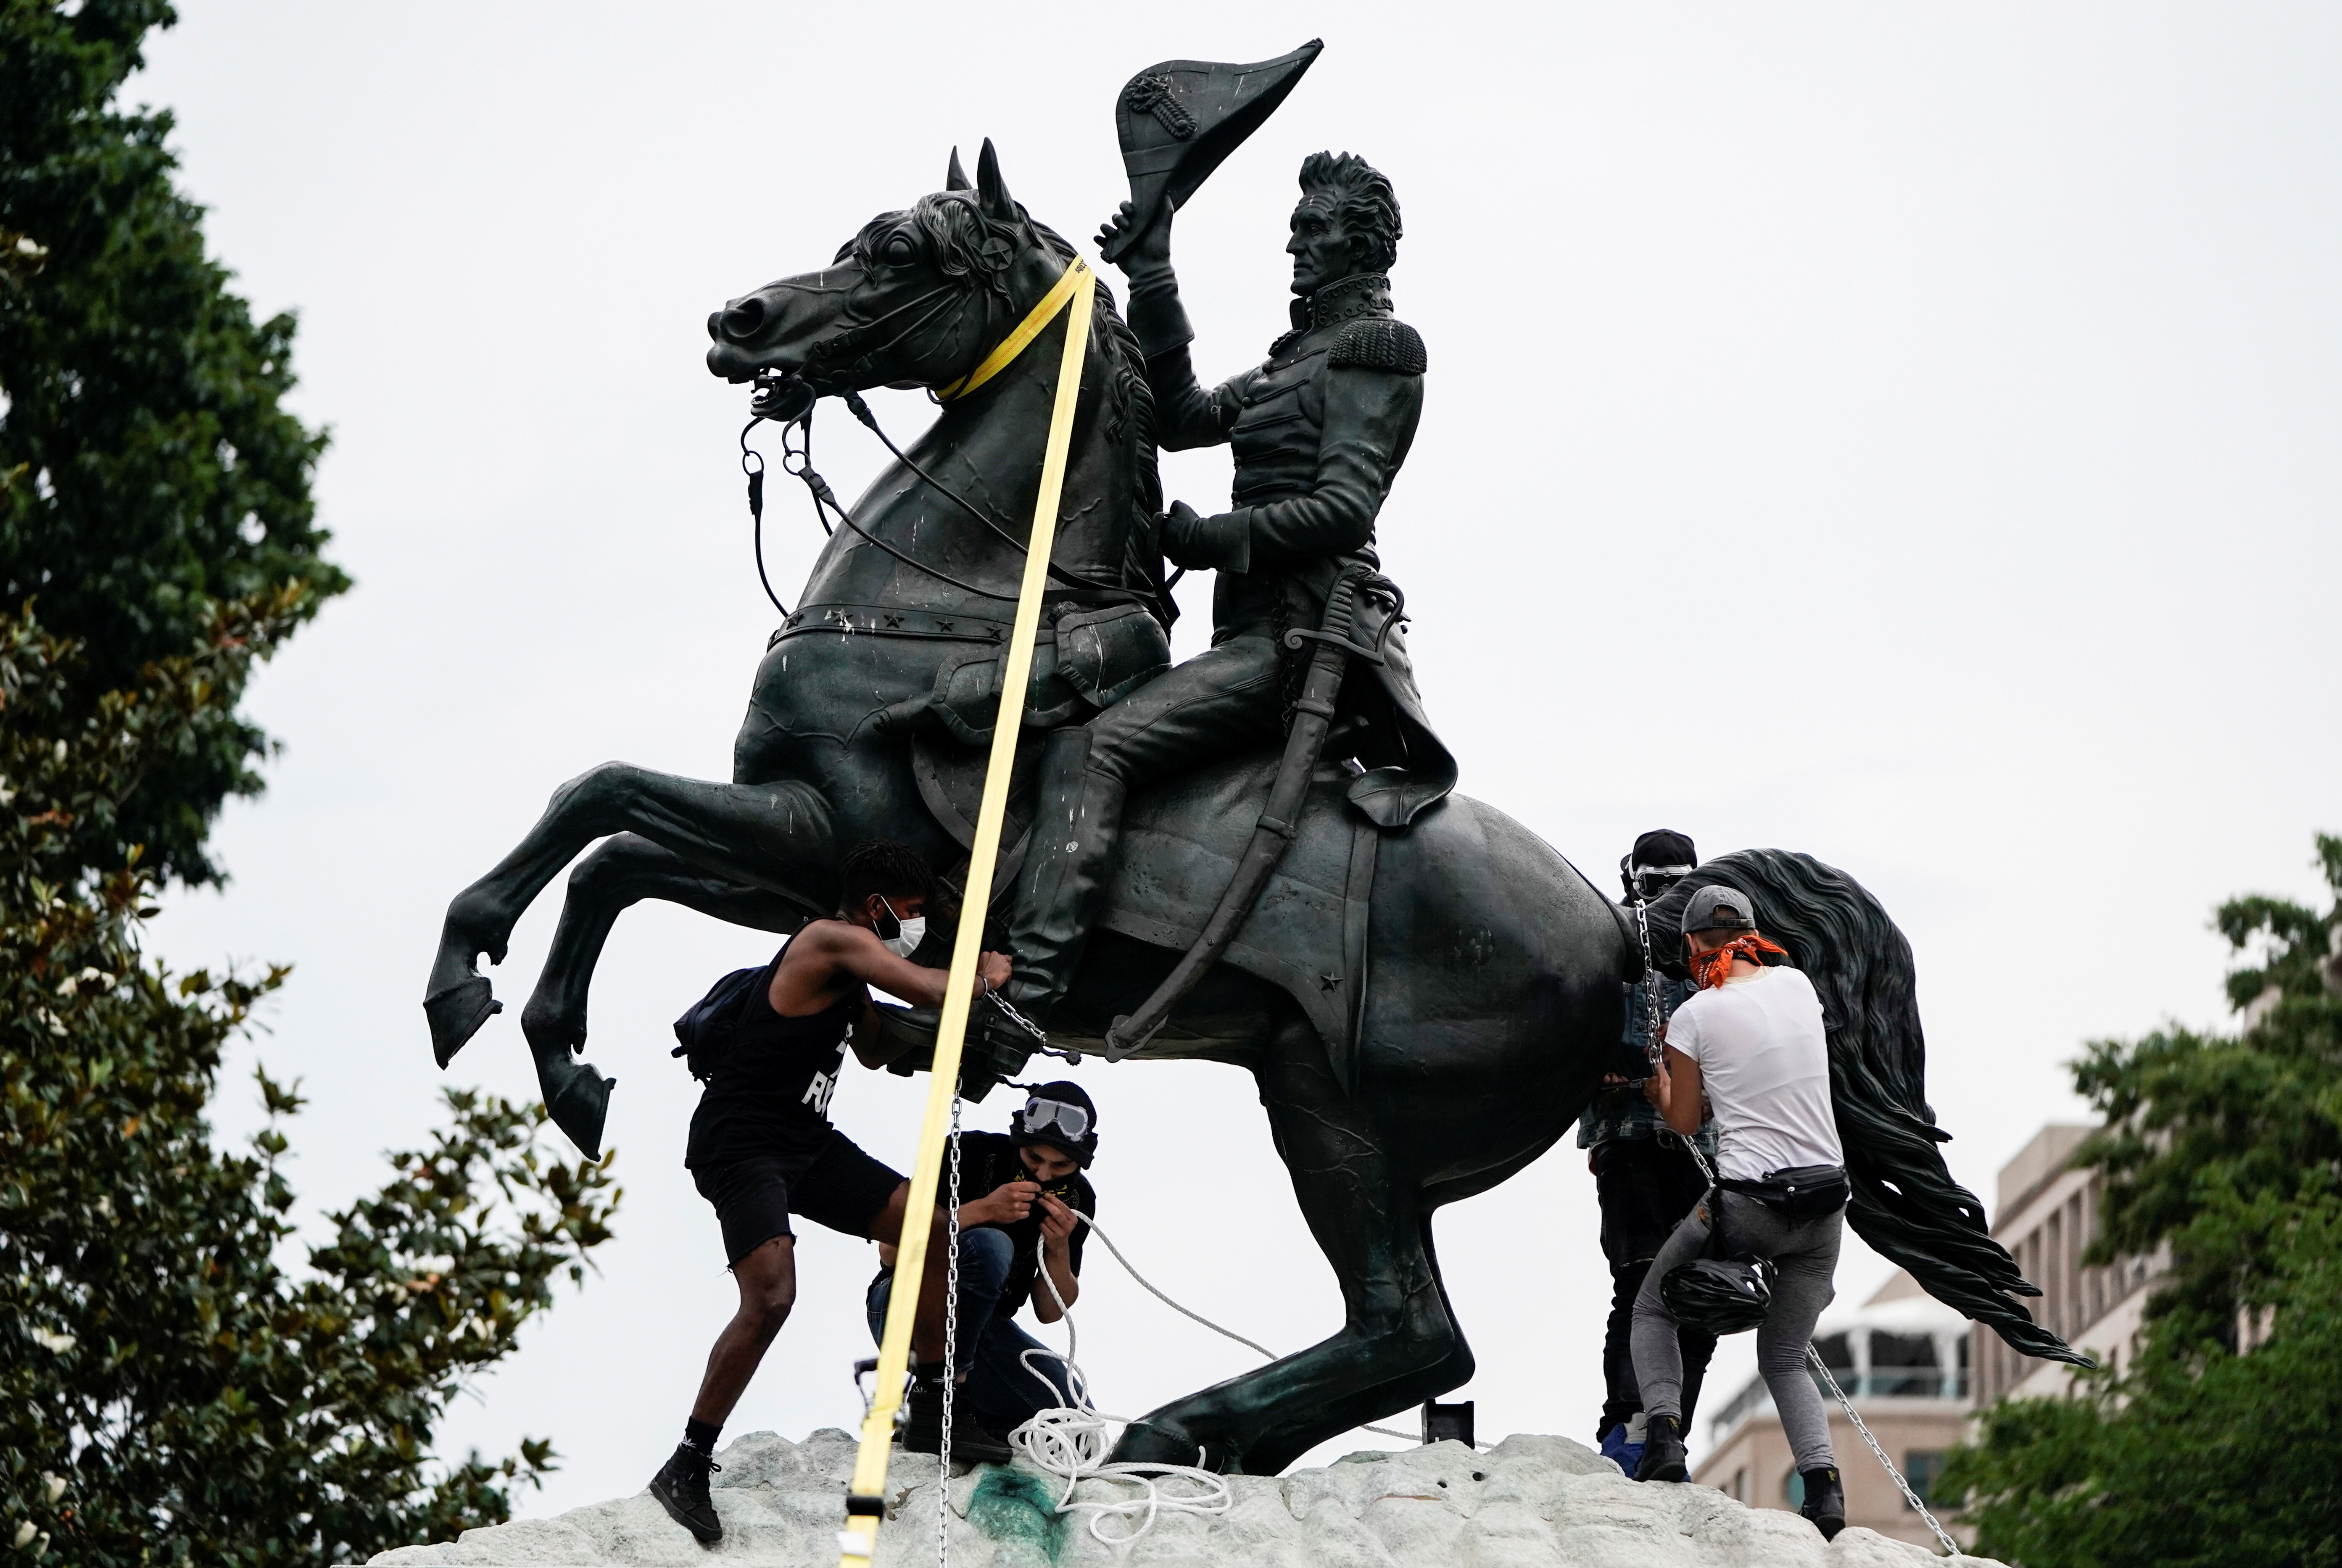 Protesters attempt to pull down the statue of former US president Andrew Jackson in the middle of Lafayette Park in front of the White House during racial inequality protests in Washington on June 22. Photo: Reuters